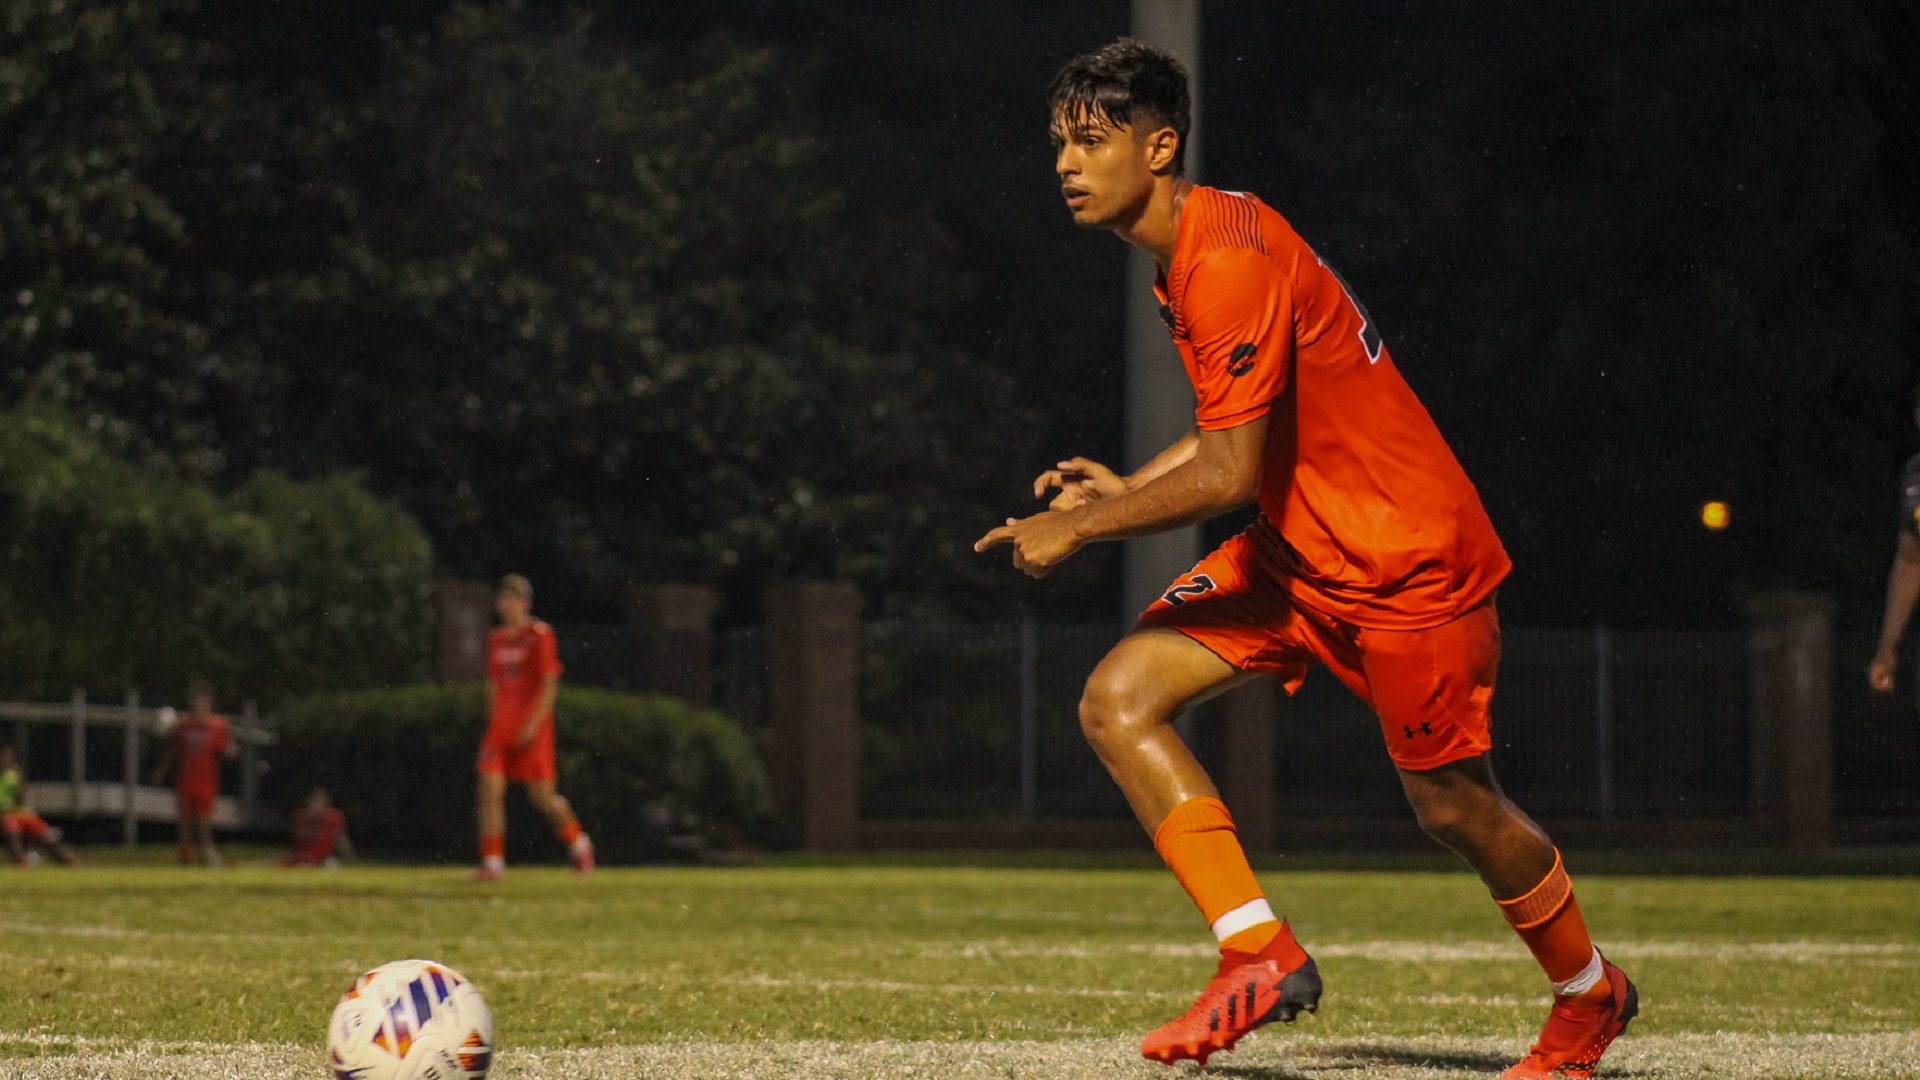 Pioneers net three late goals, defeat King 3-0